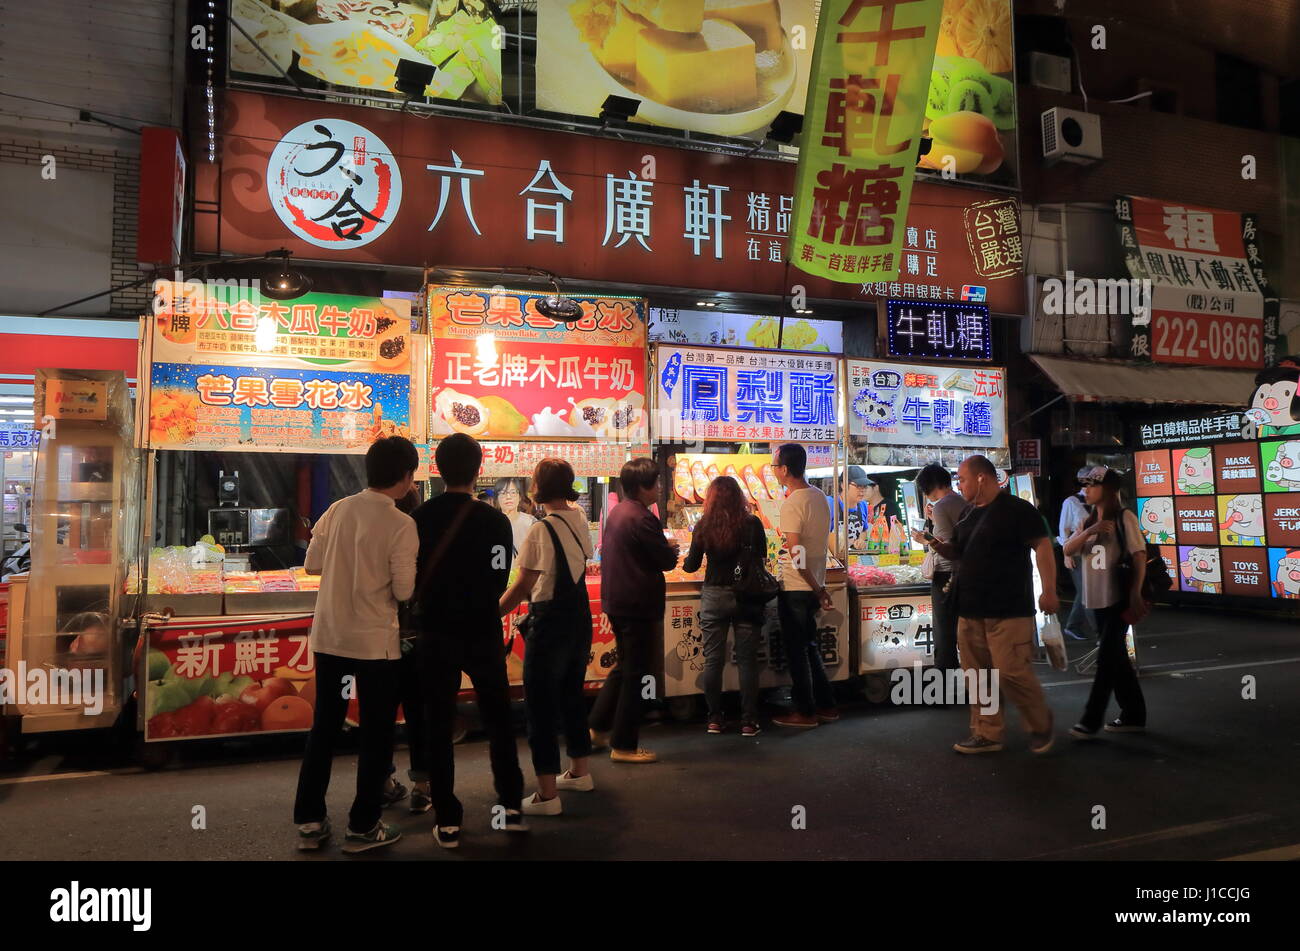 People visit Liuhe night street market in Kaohsiung Taiwan. Liuhe market is one of the most popular markets in Taiwan. Stock Photo